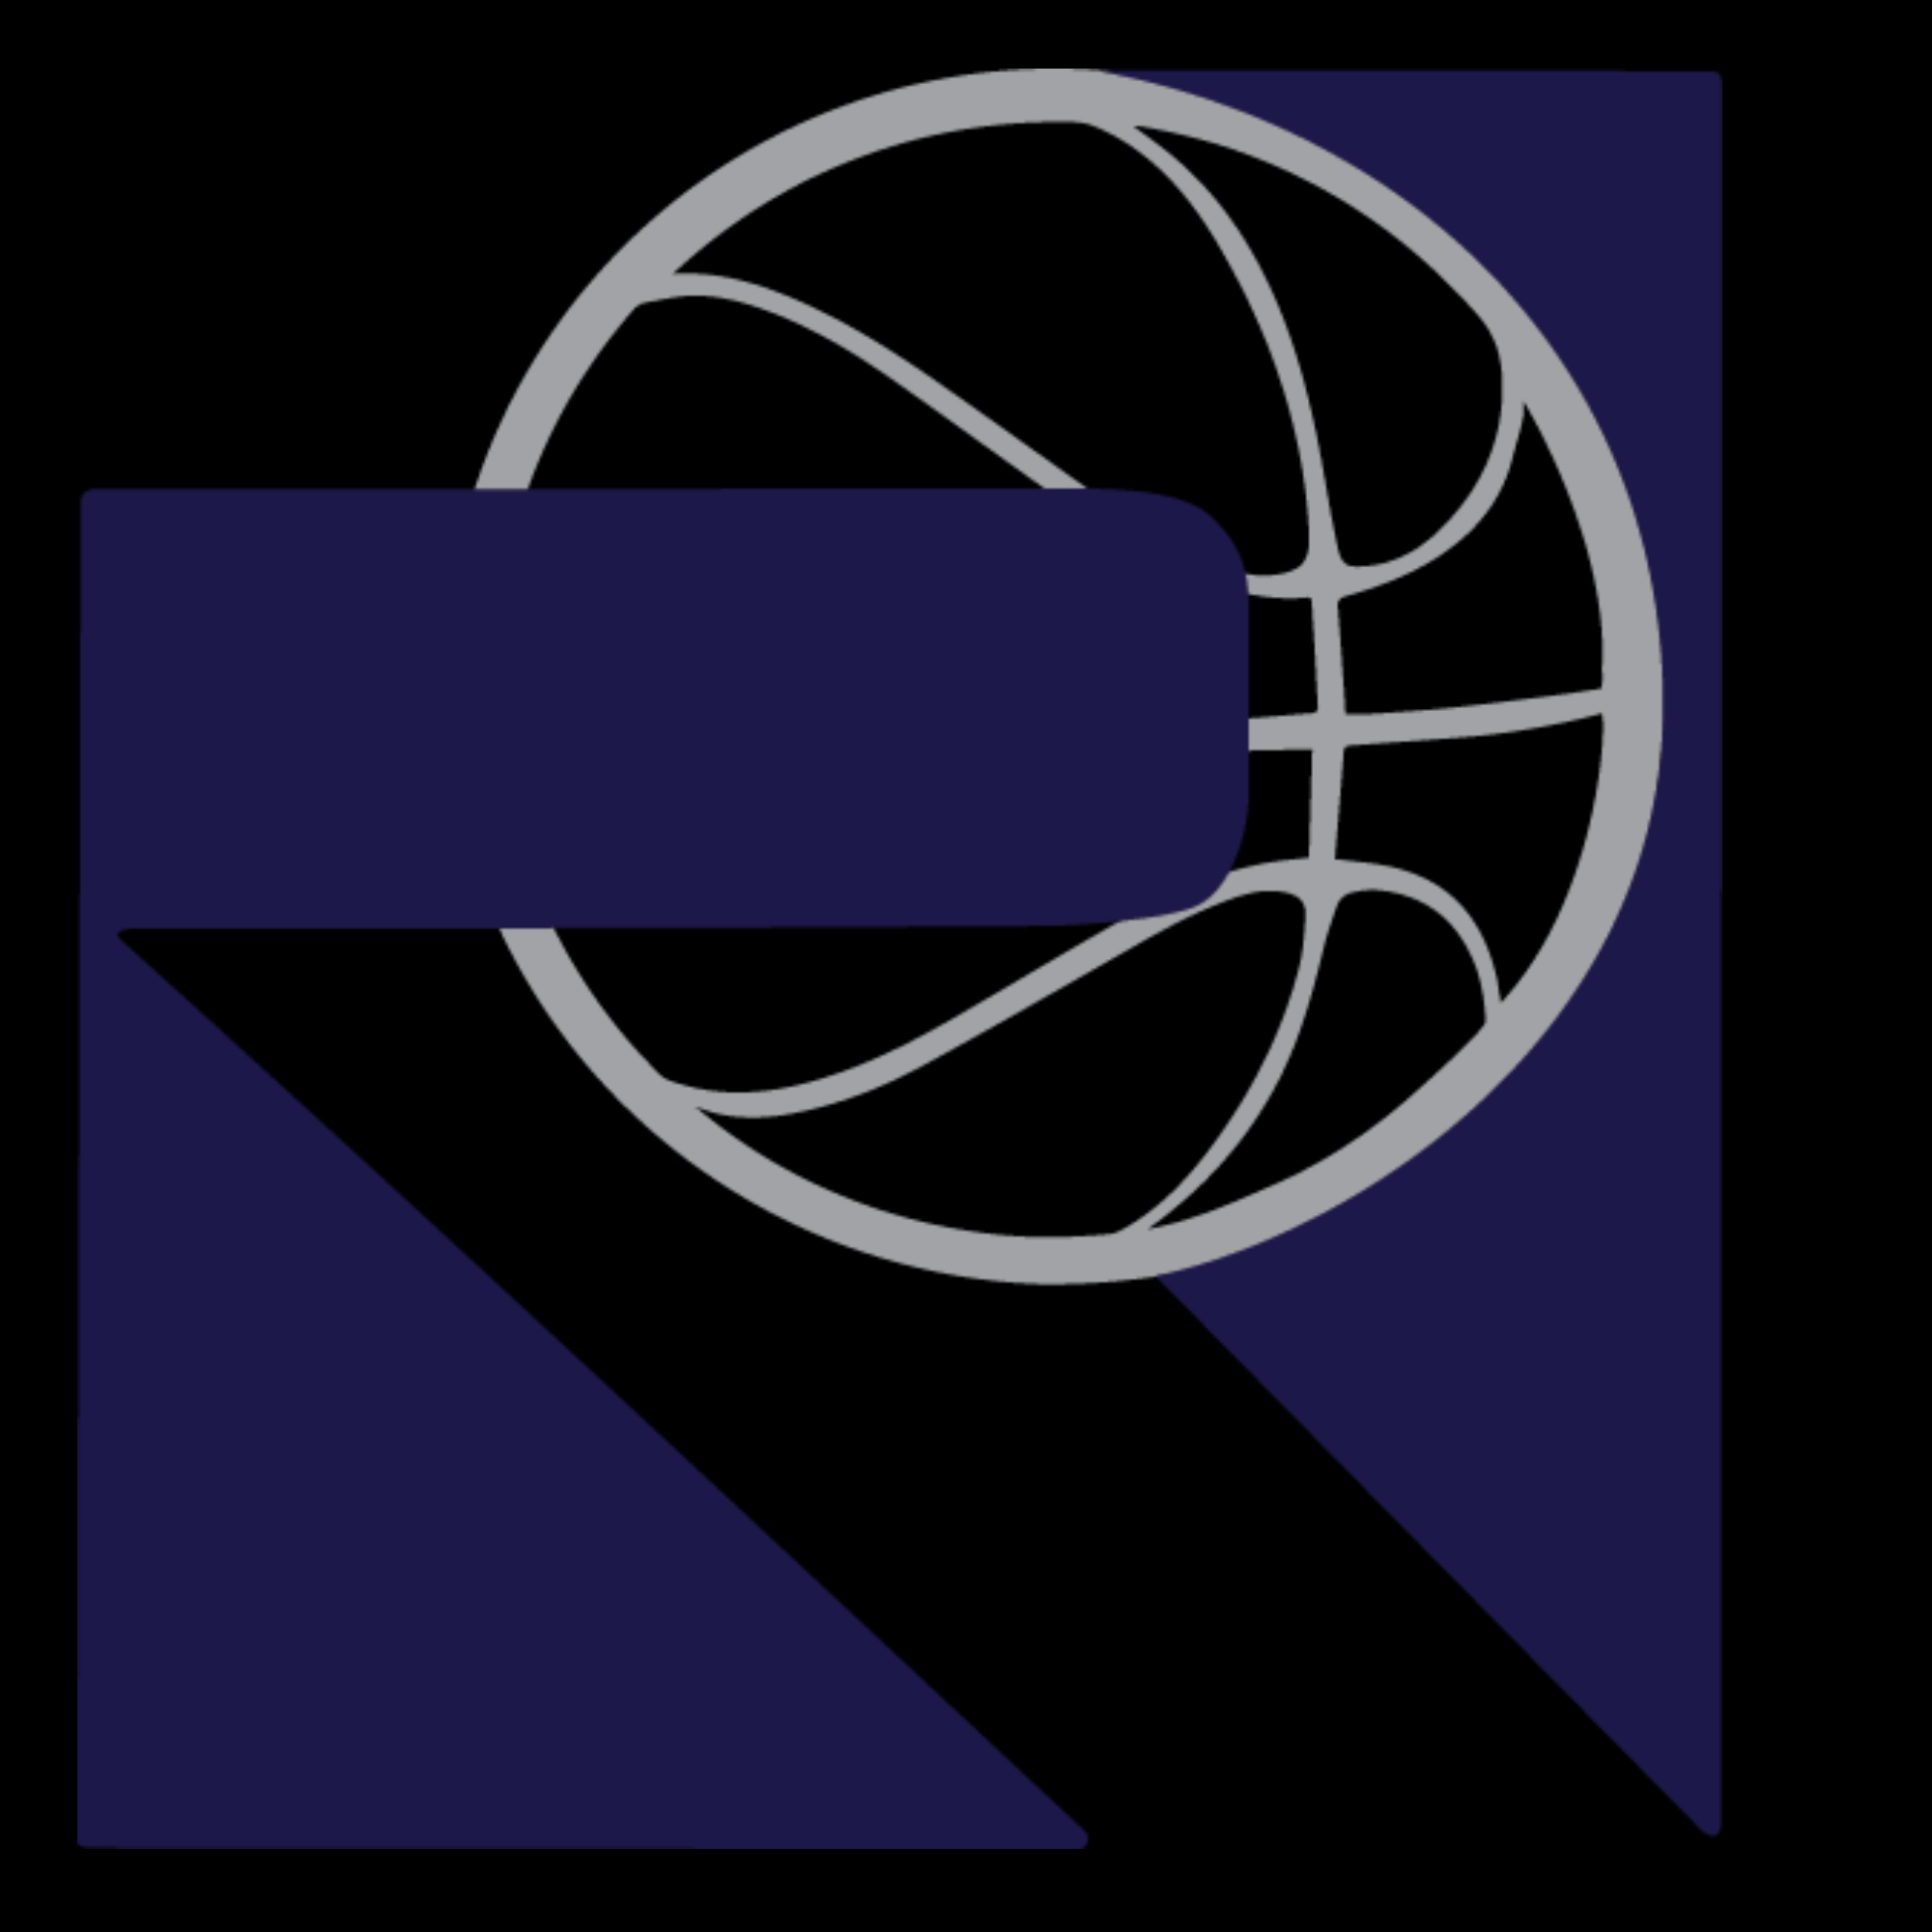 The official logo of San Diego Relentless